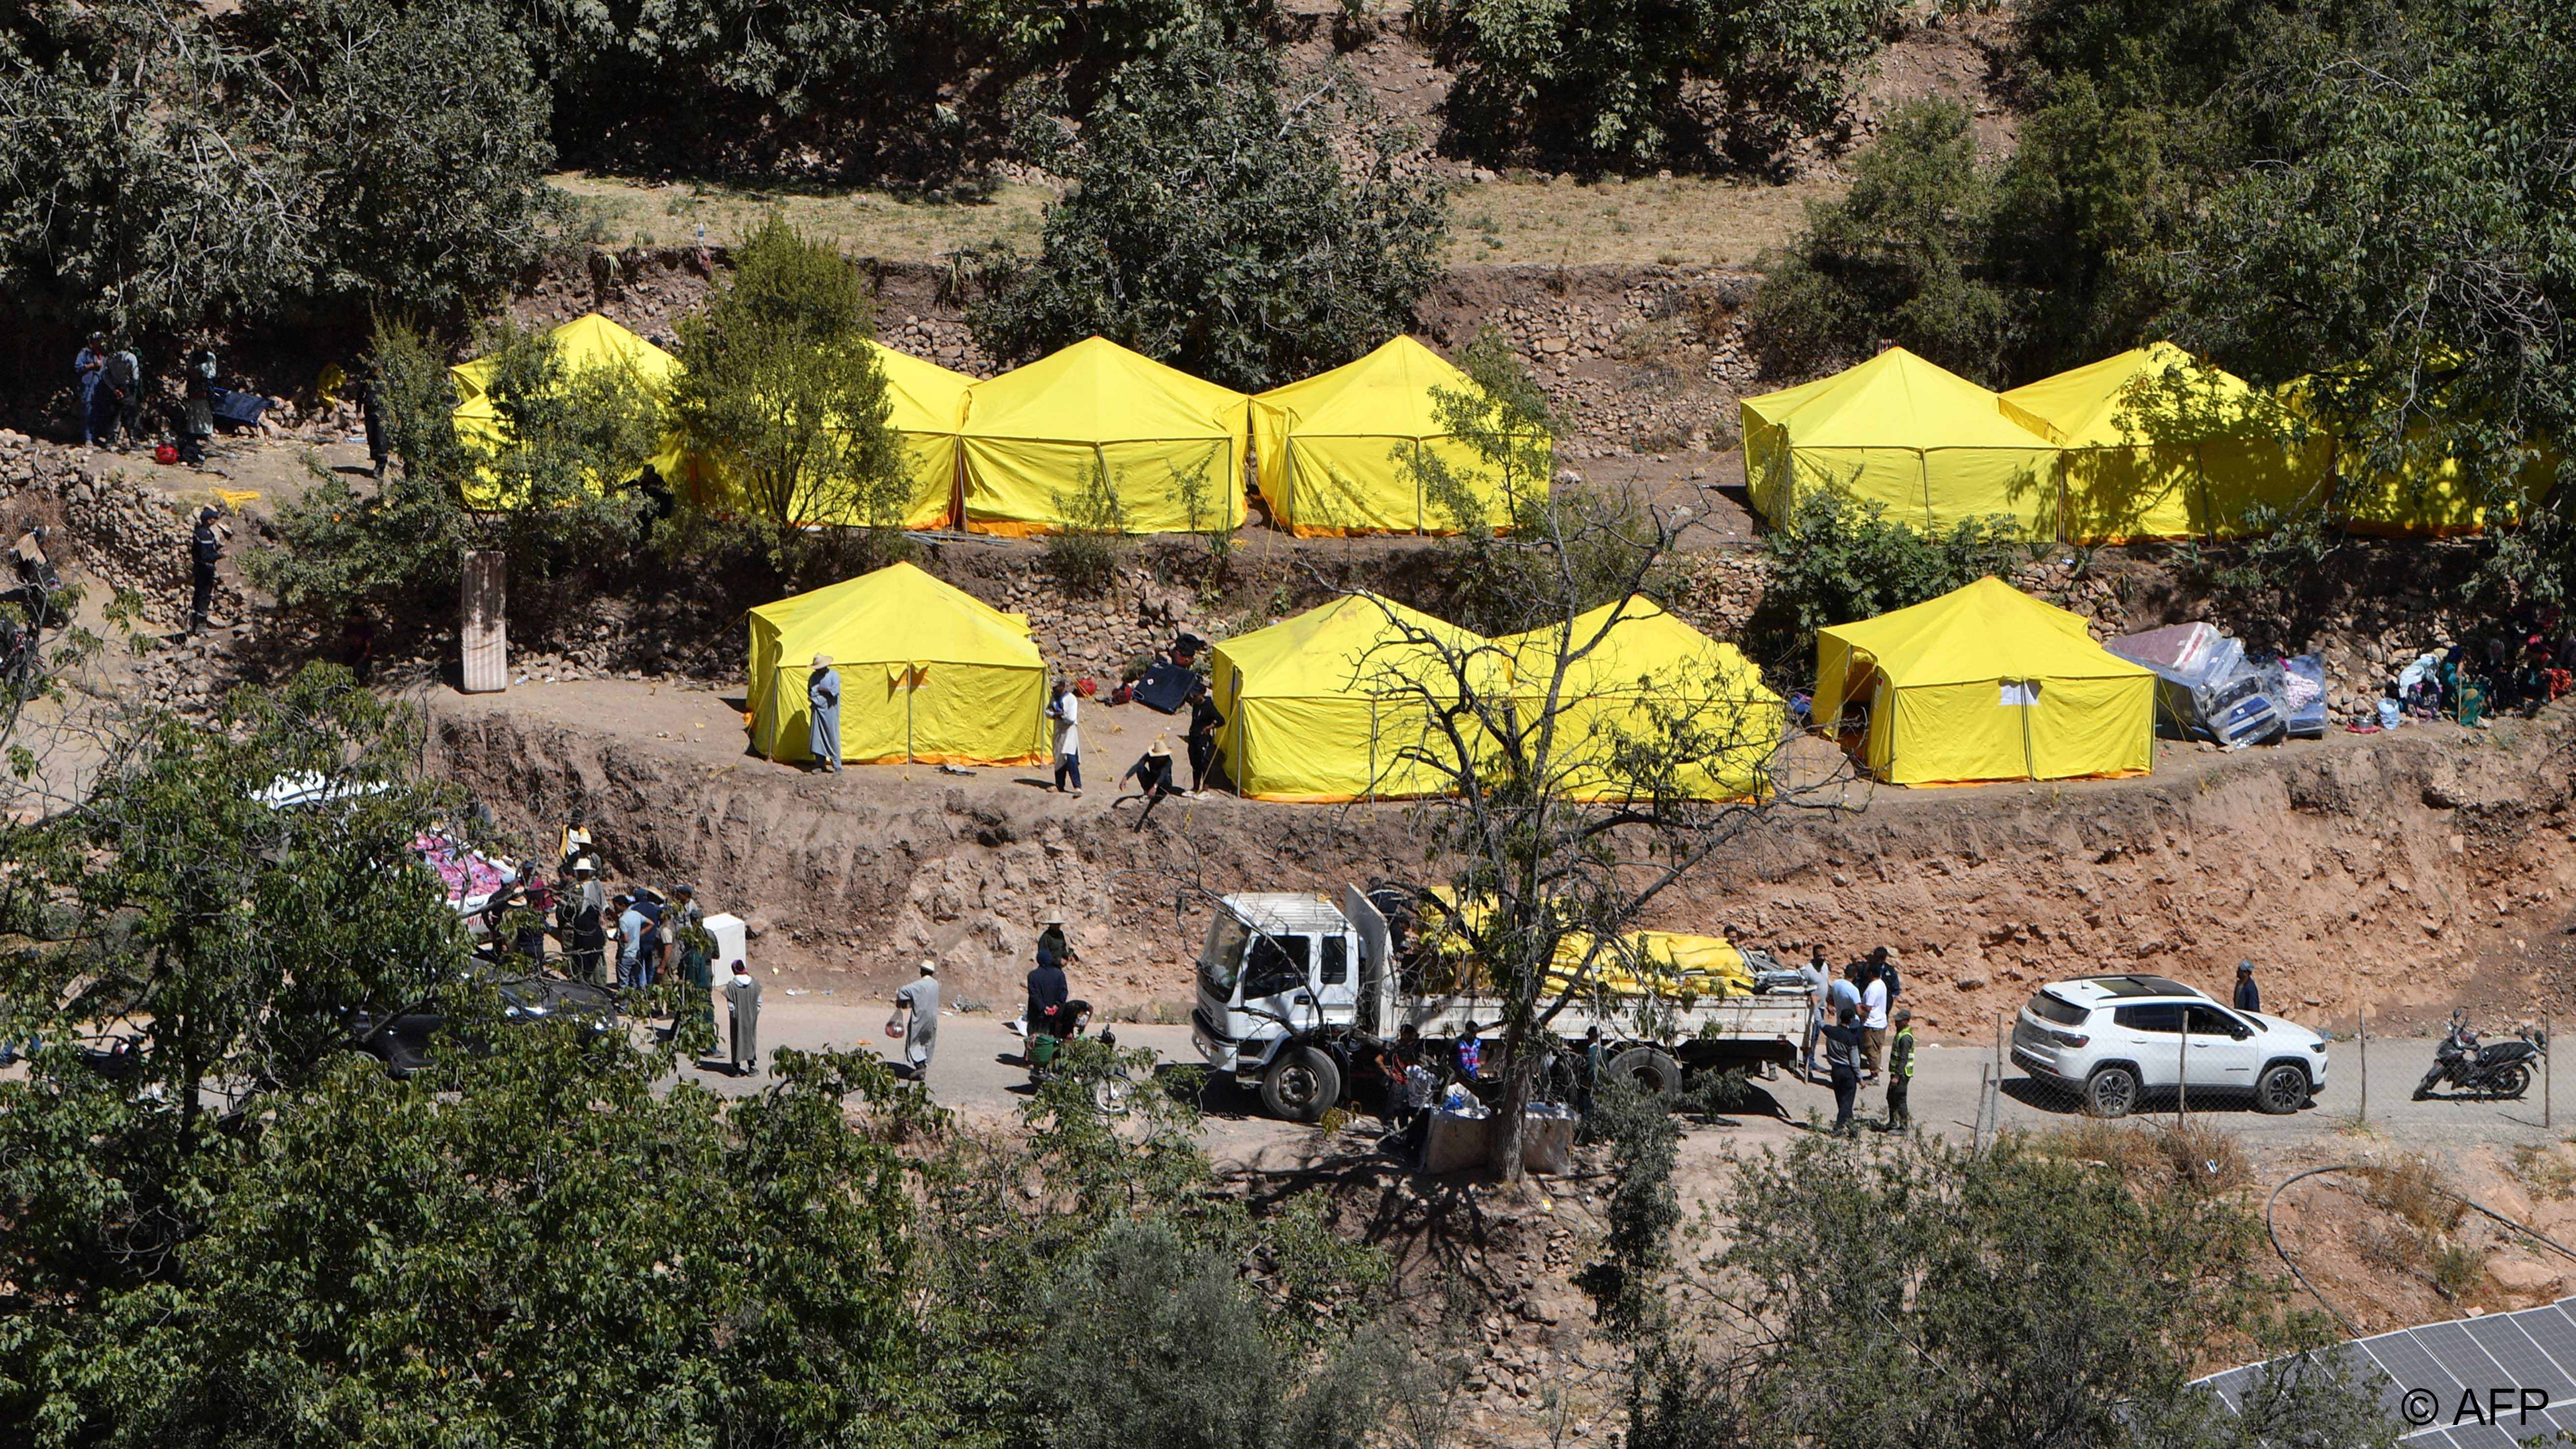 Shelter tents are erected by Moroccan authorities for the survivors of the deadly earthquake (image: FETHI BELAID/AFP)